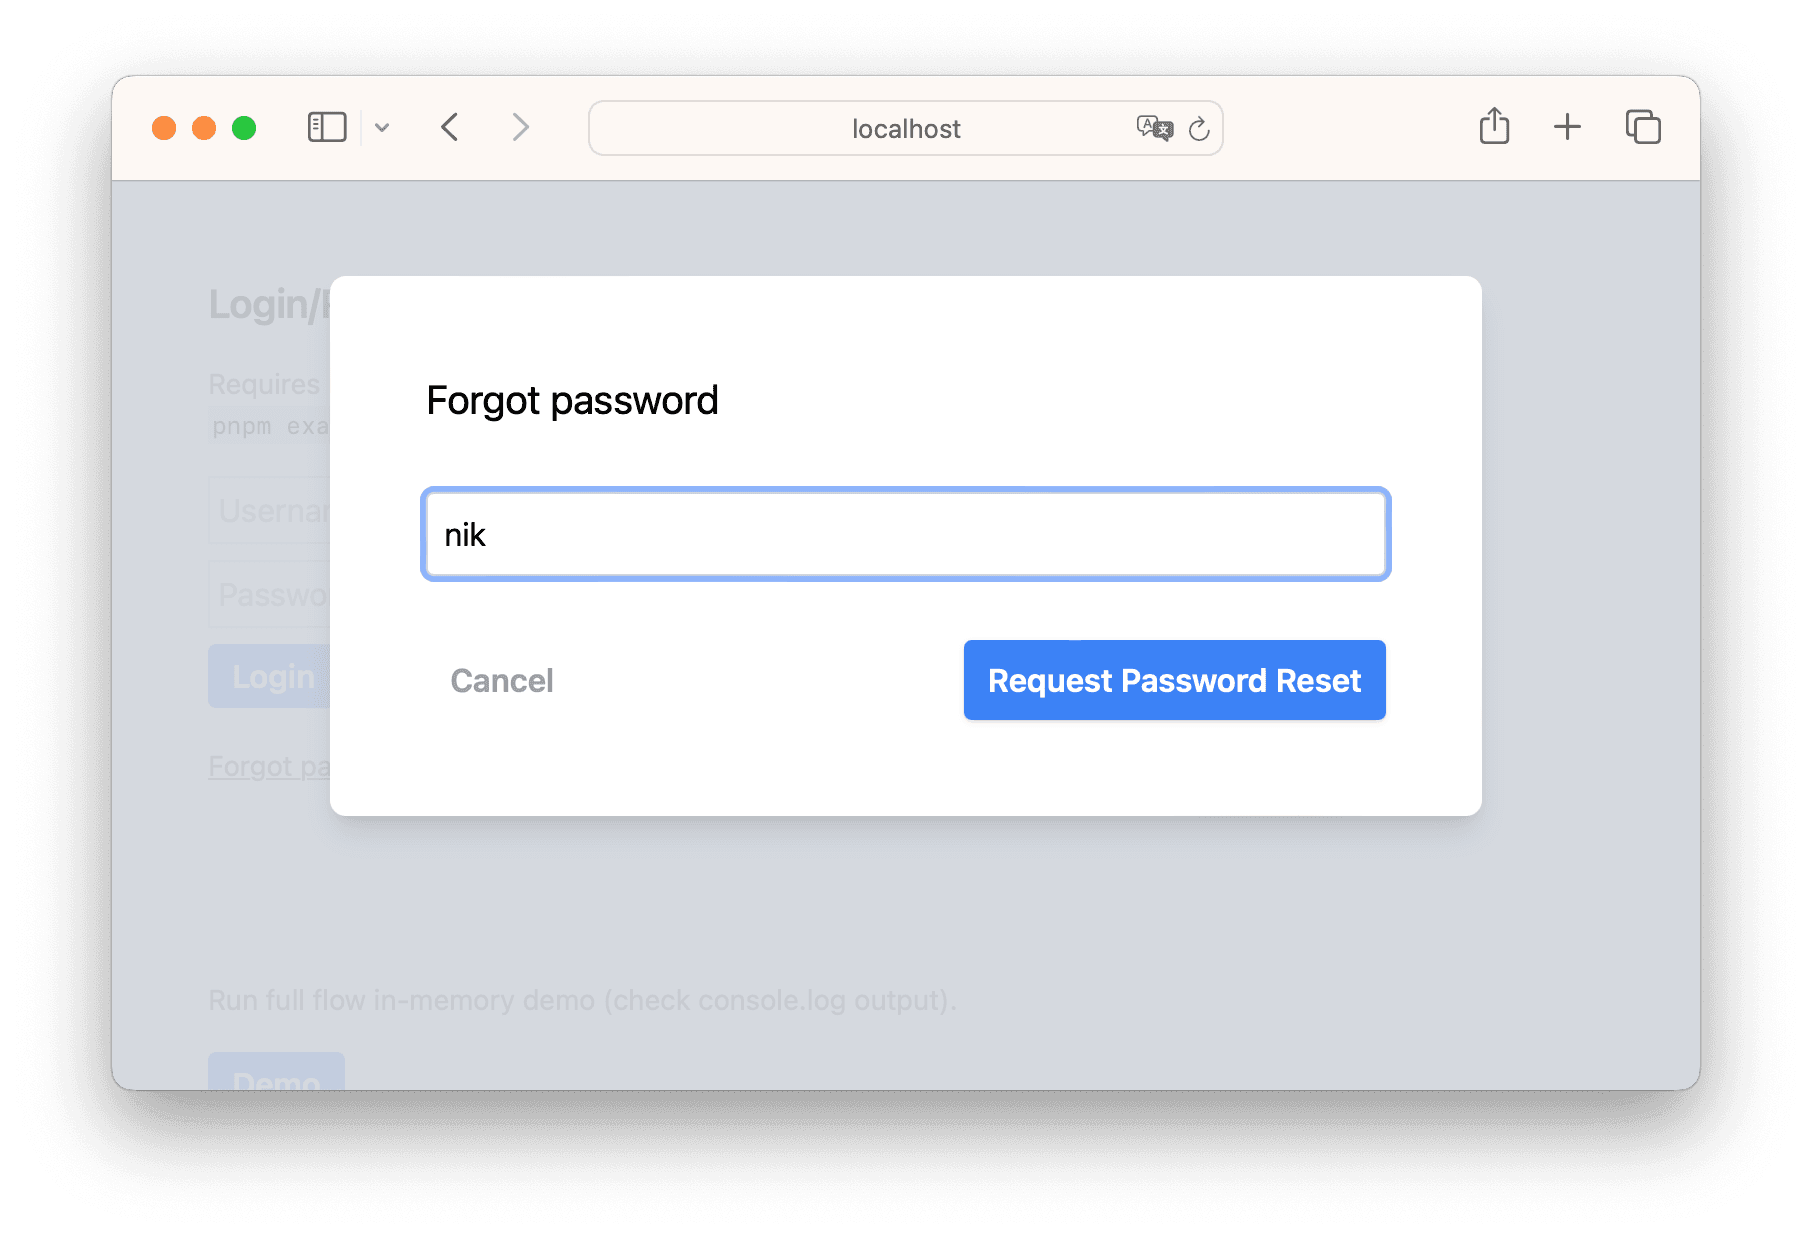 Screenshot of the Forgot Password form showing on username input field